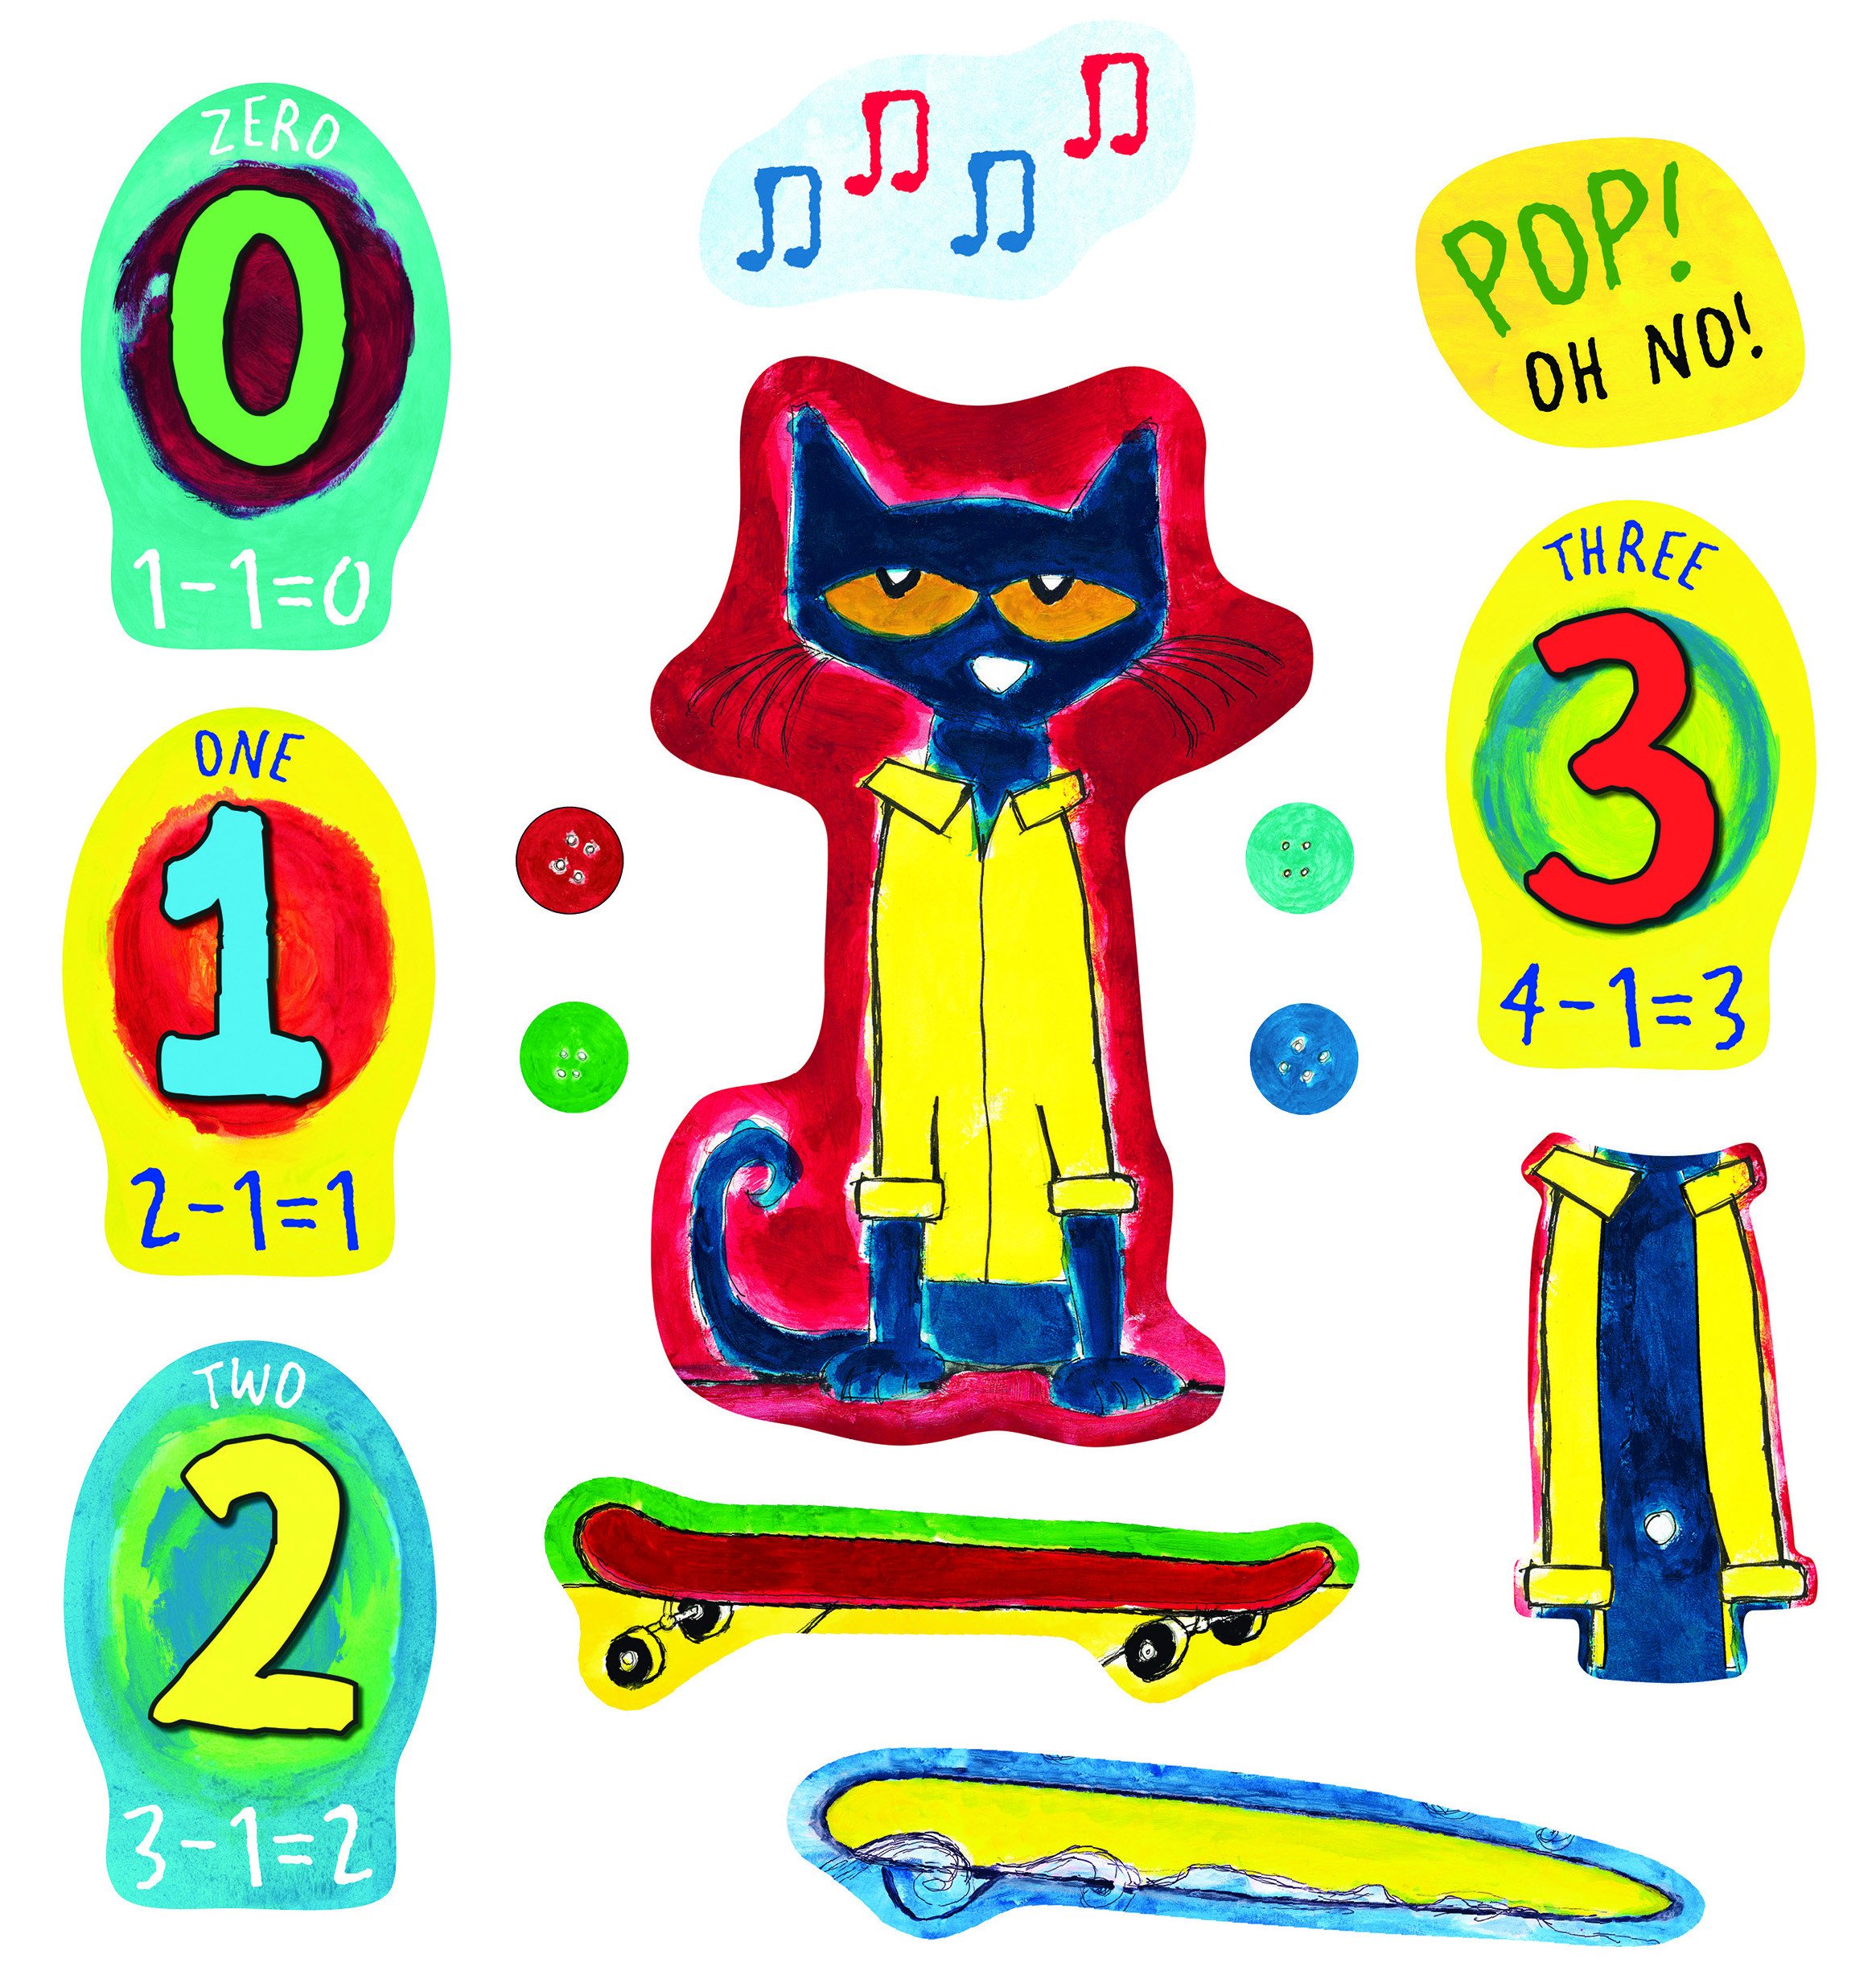 buttons-clipart-pete-the-cat-buttons-pete-the-cat-transparent-free-for